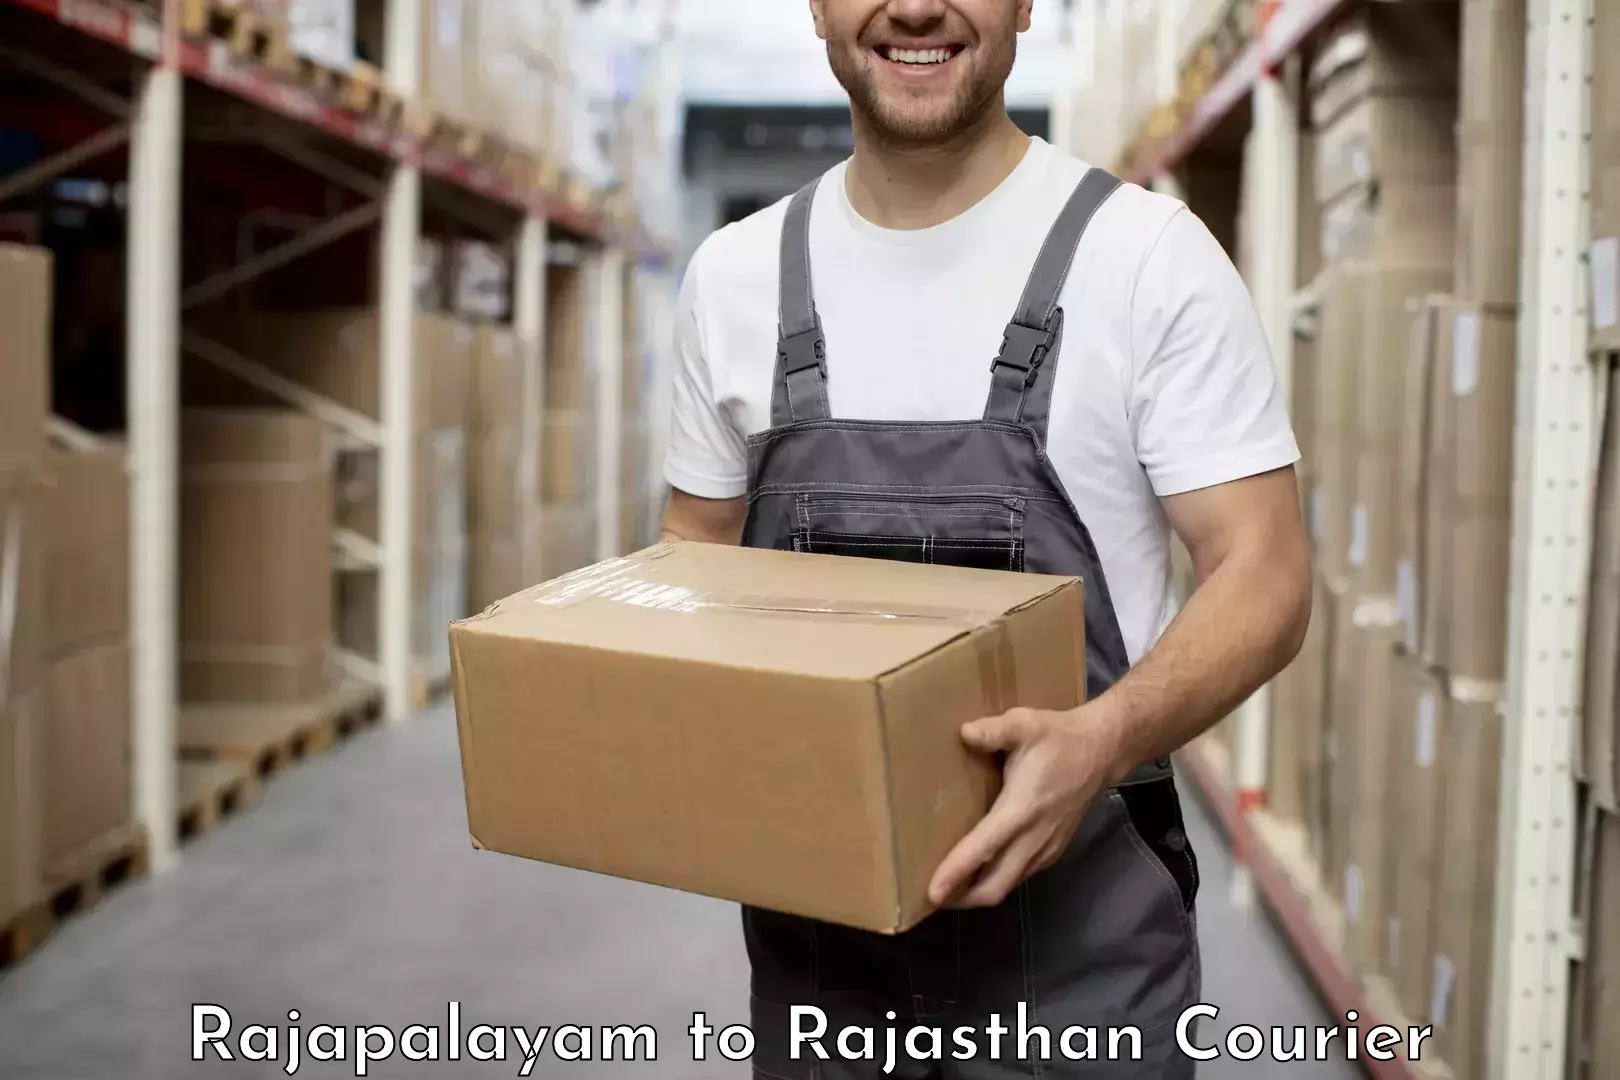 Reliable delivery network Rajapalayam to Deoli